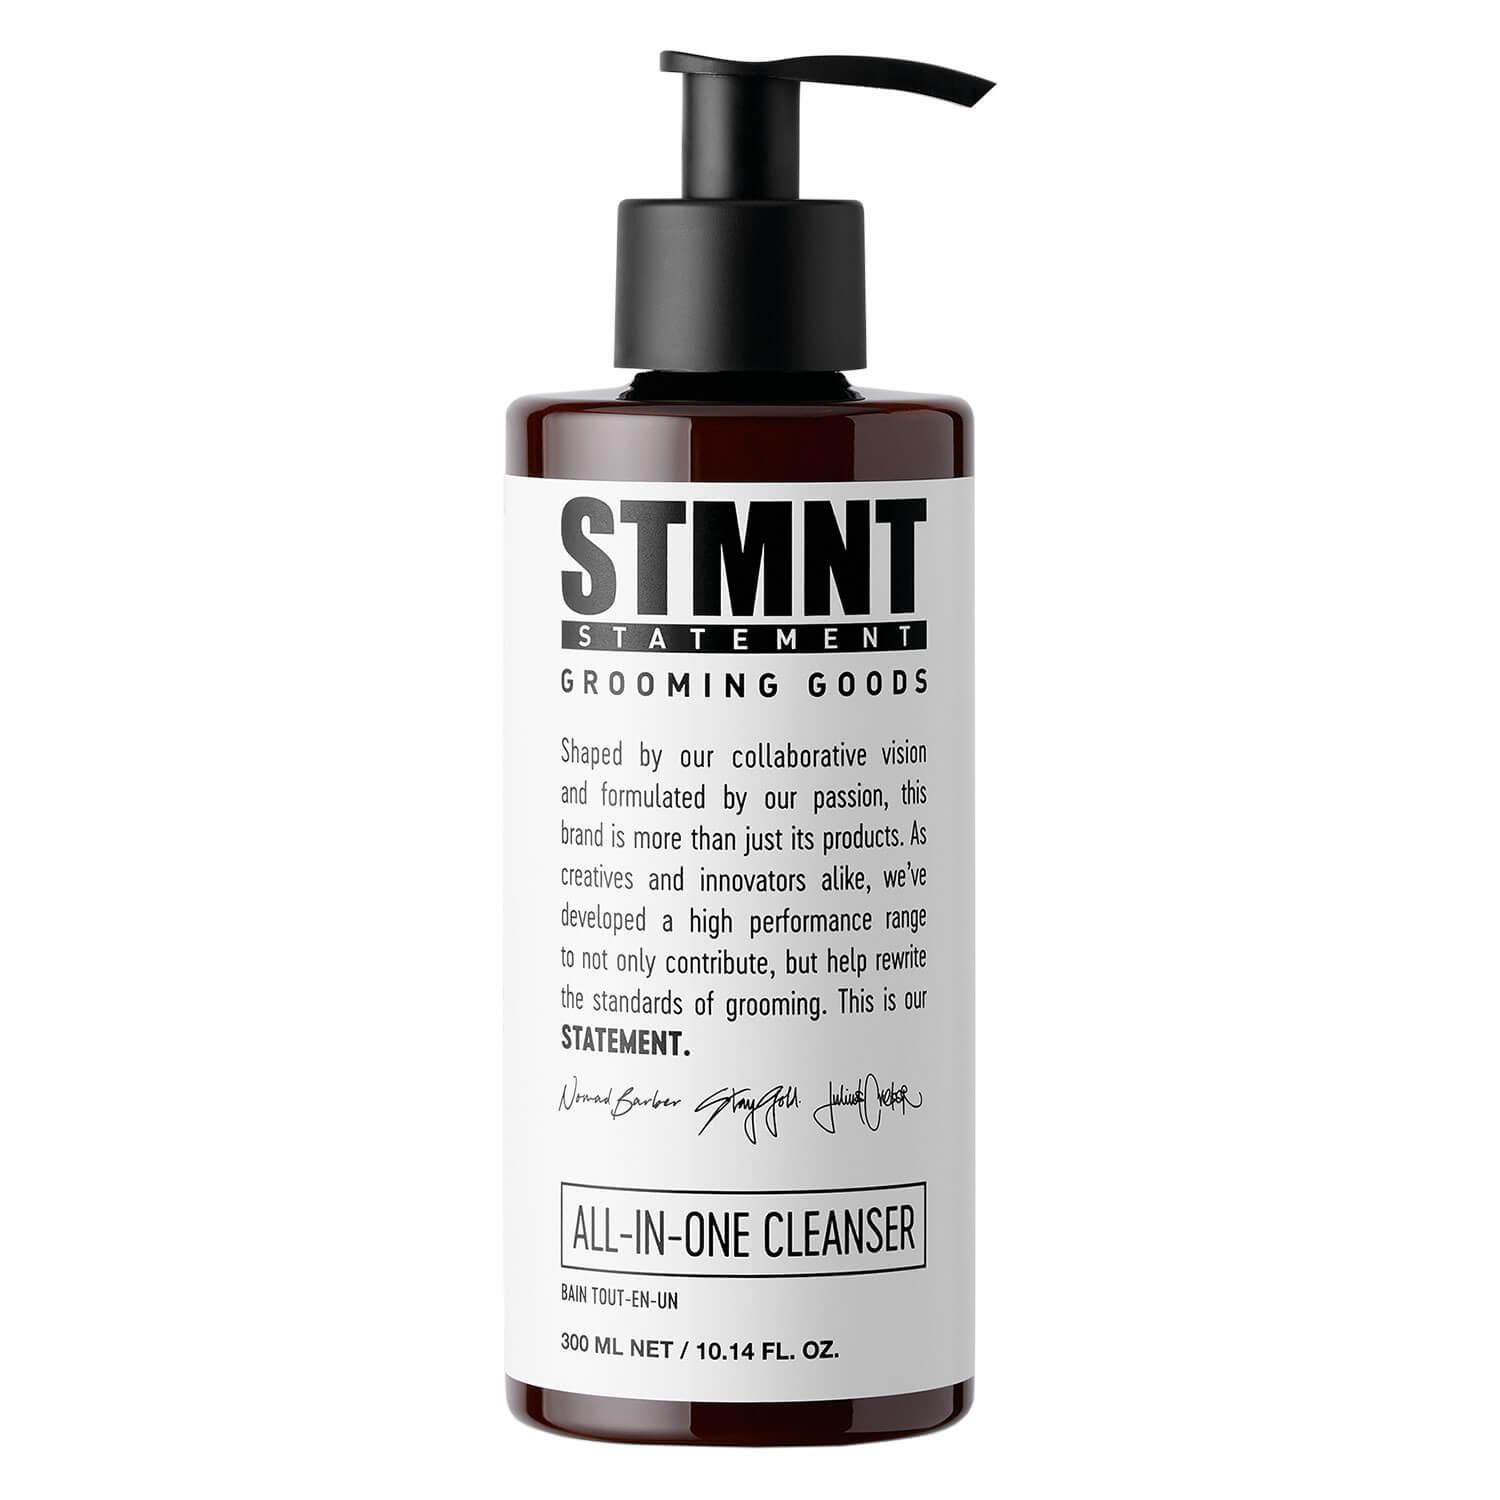 STMNT - All-in-One Cleanser